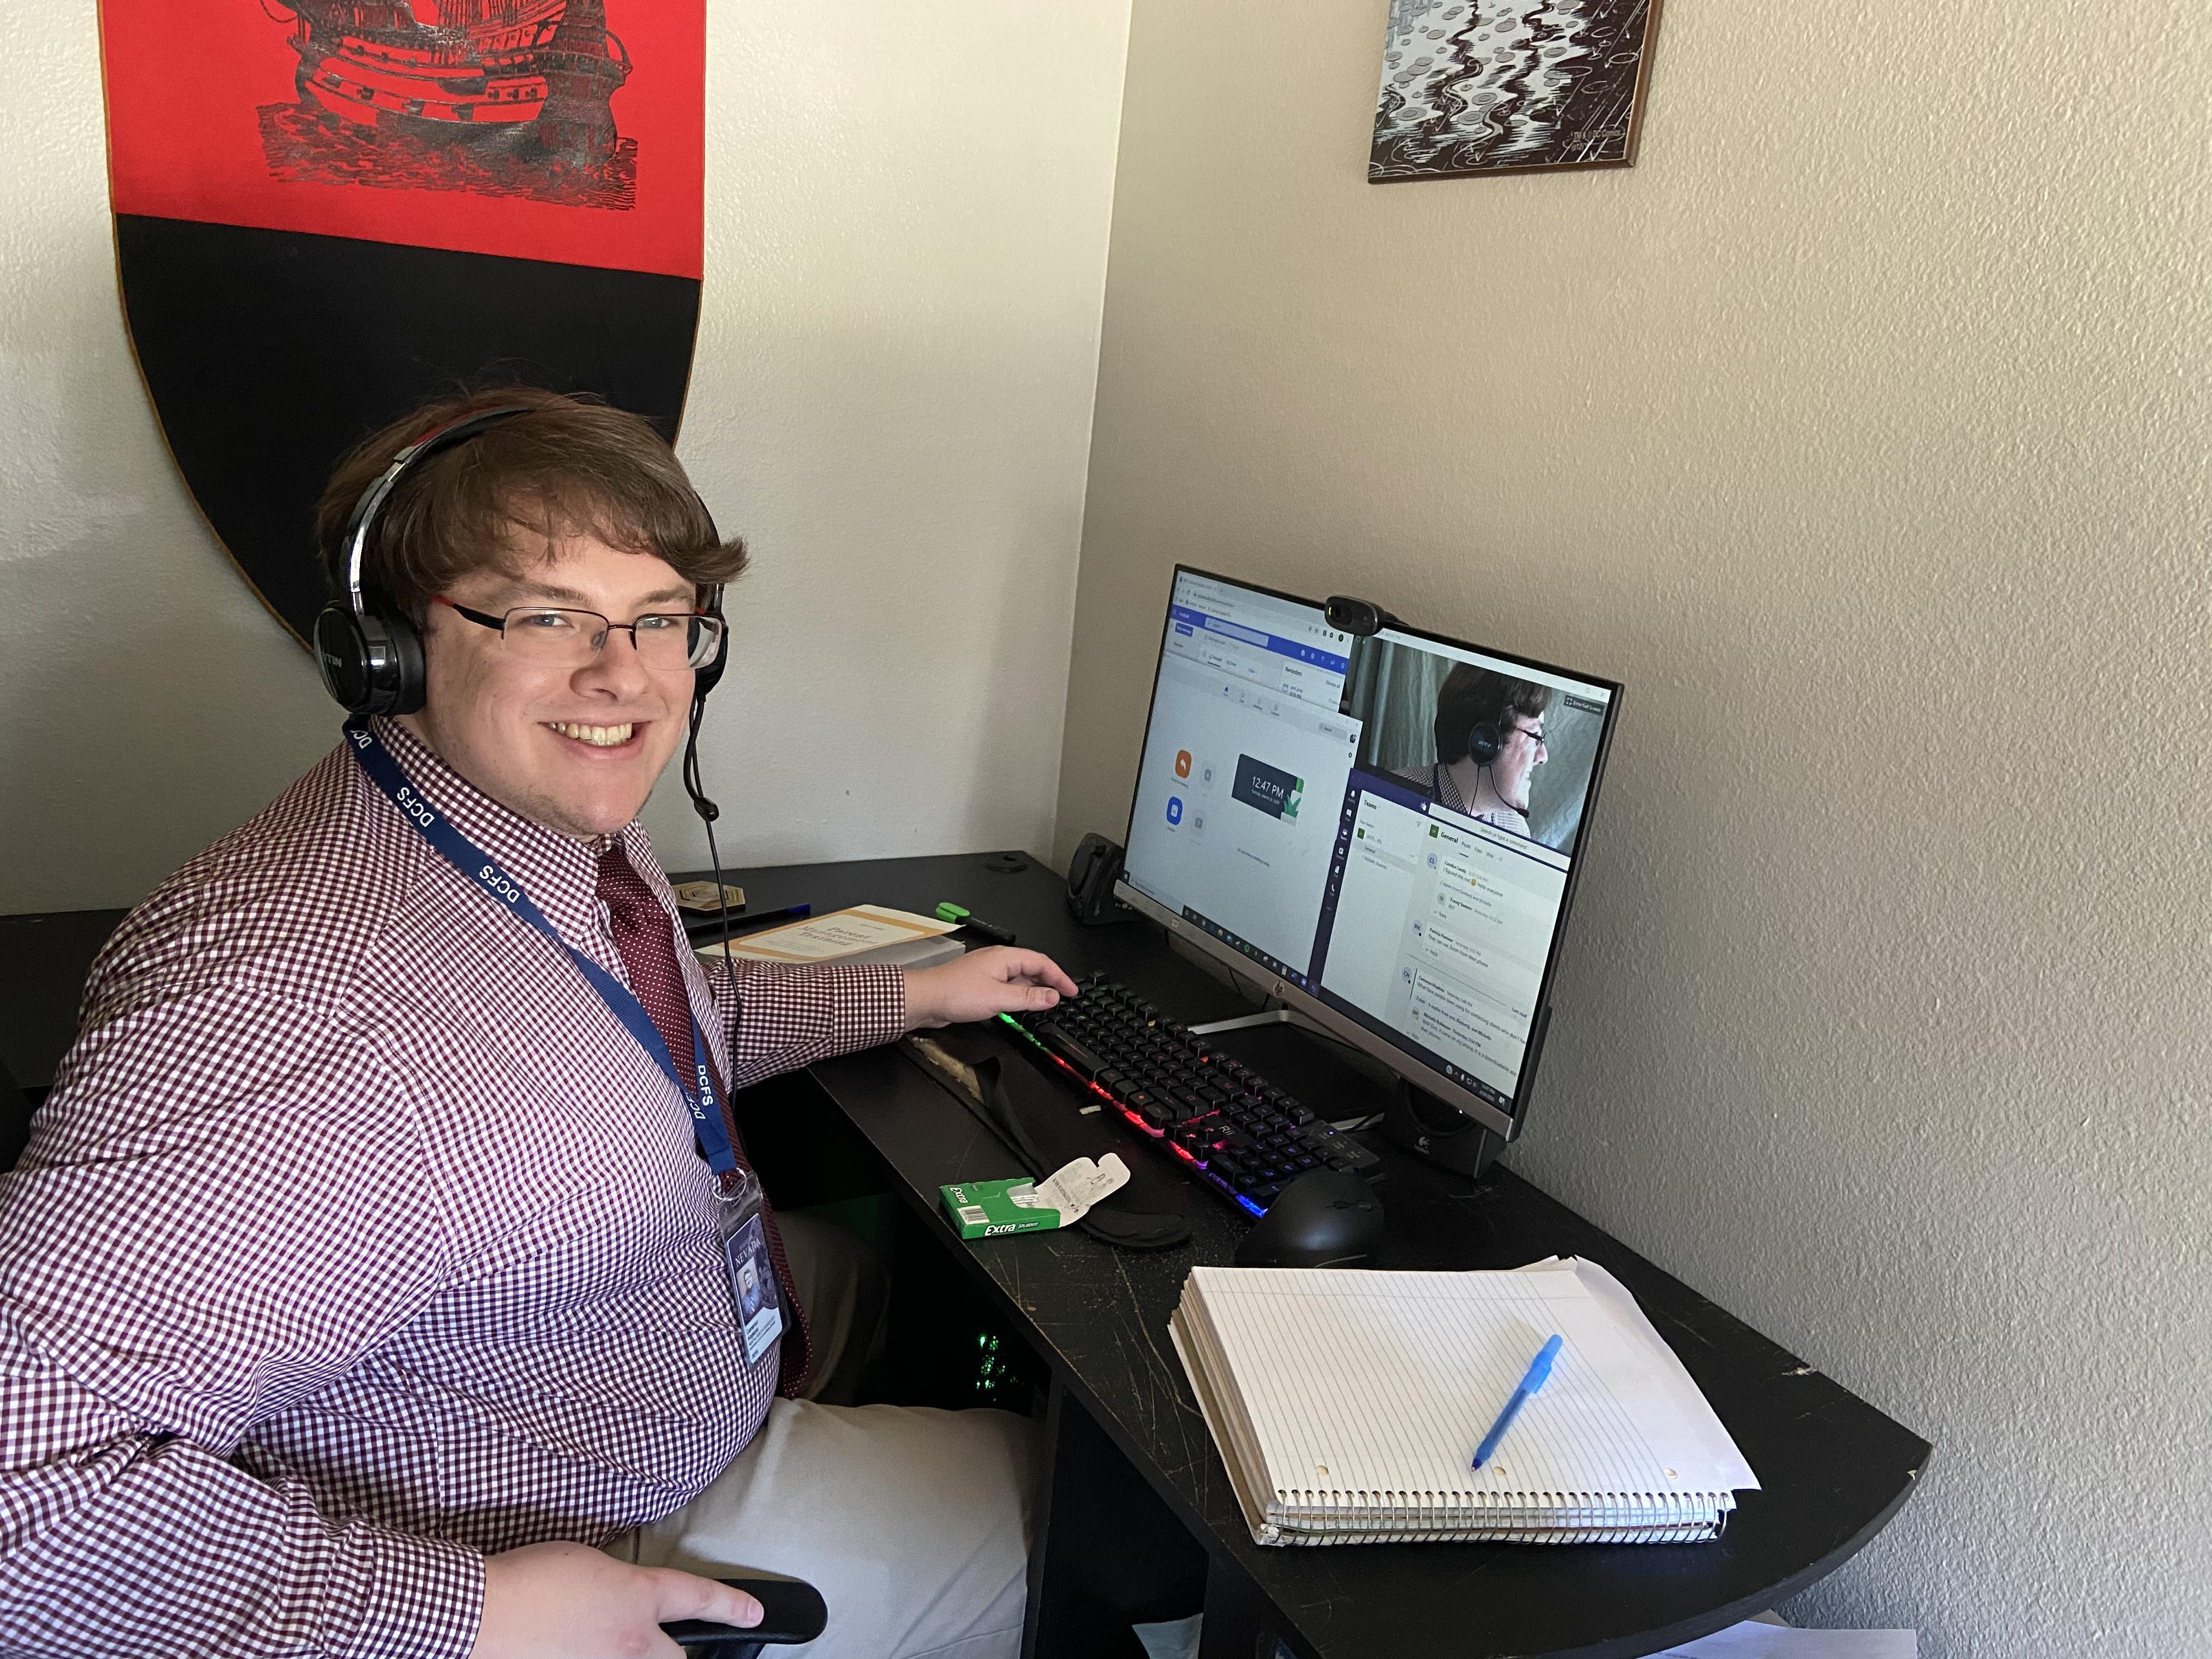 AFSCME Local 4041 member Cameron Hopkins teleworking from home